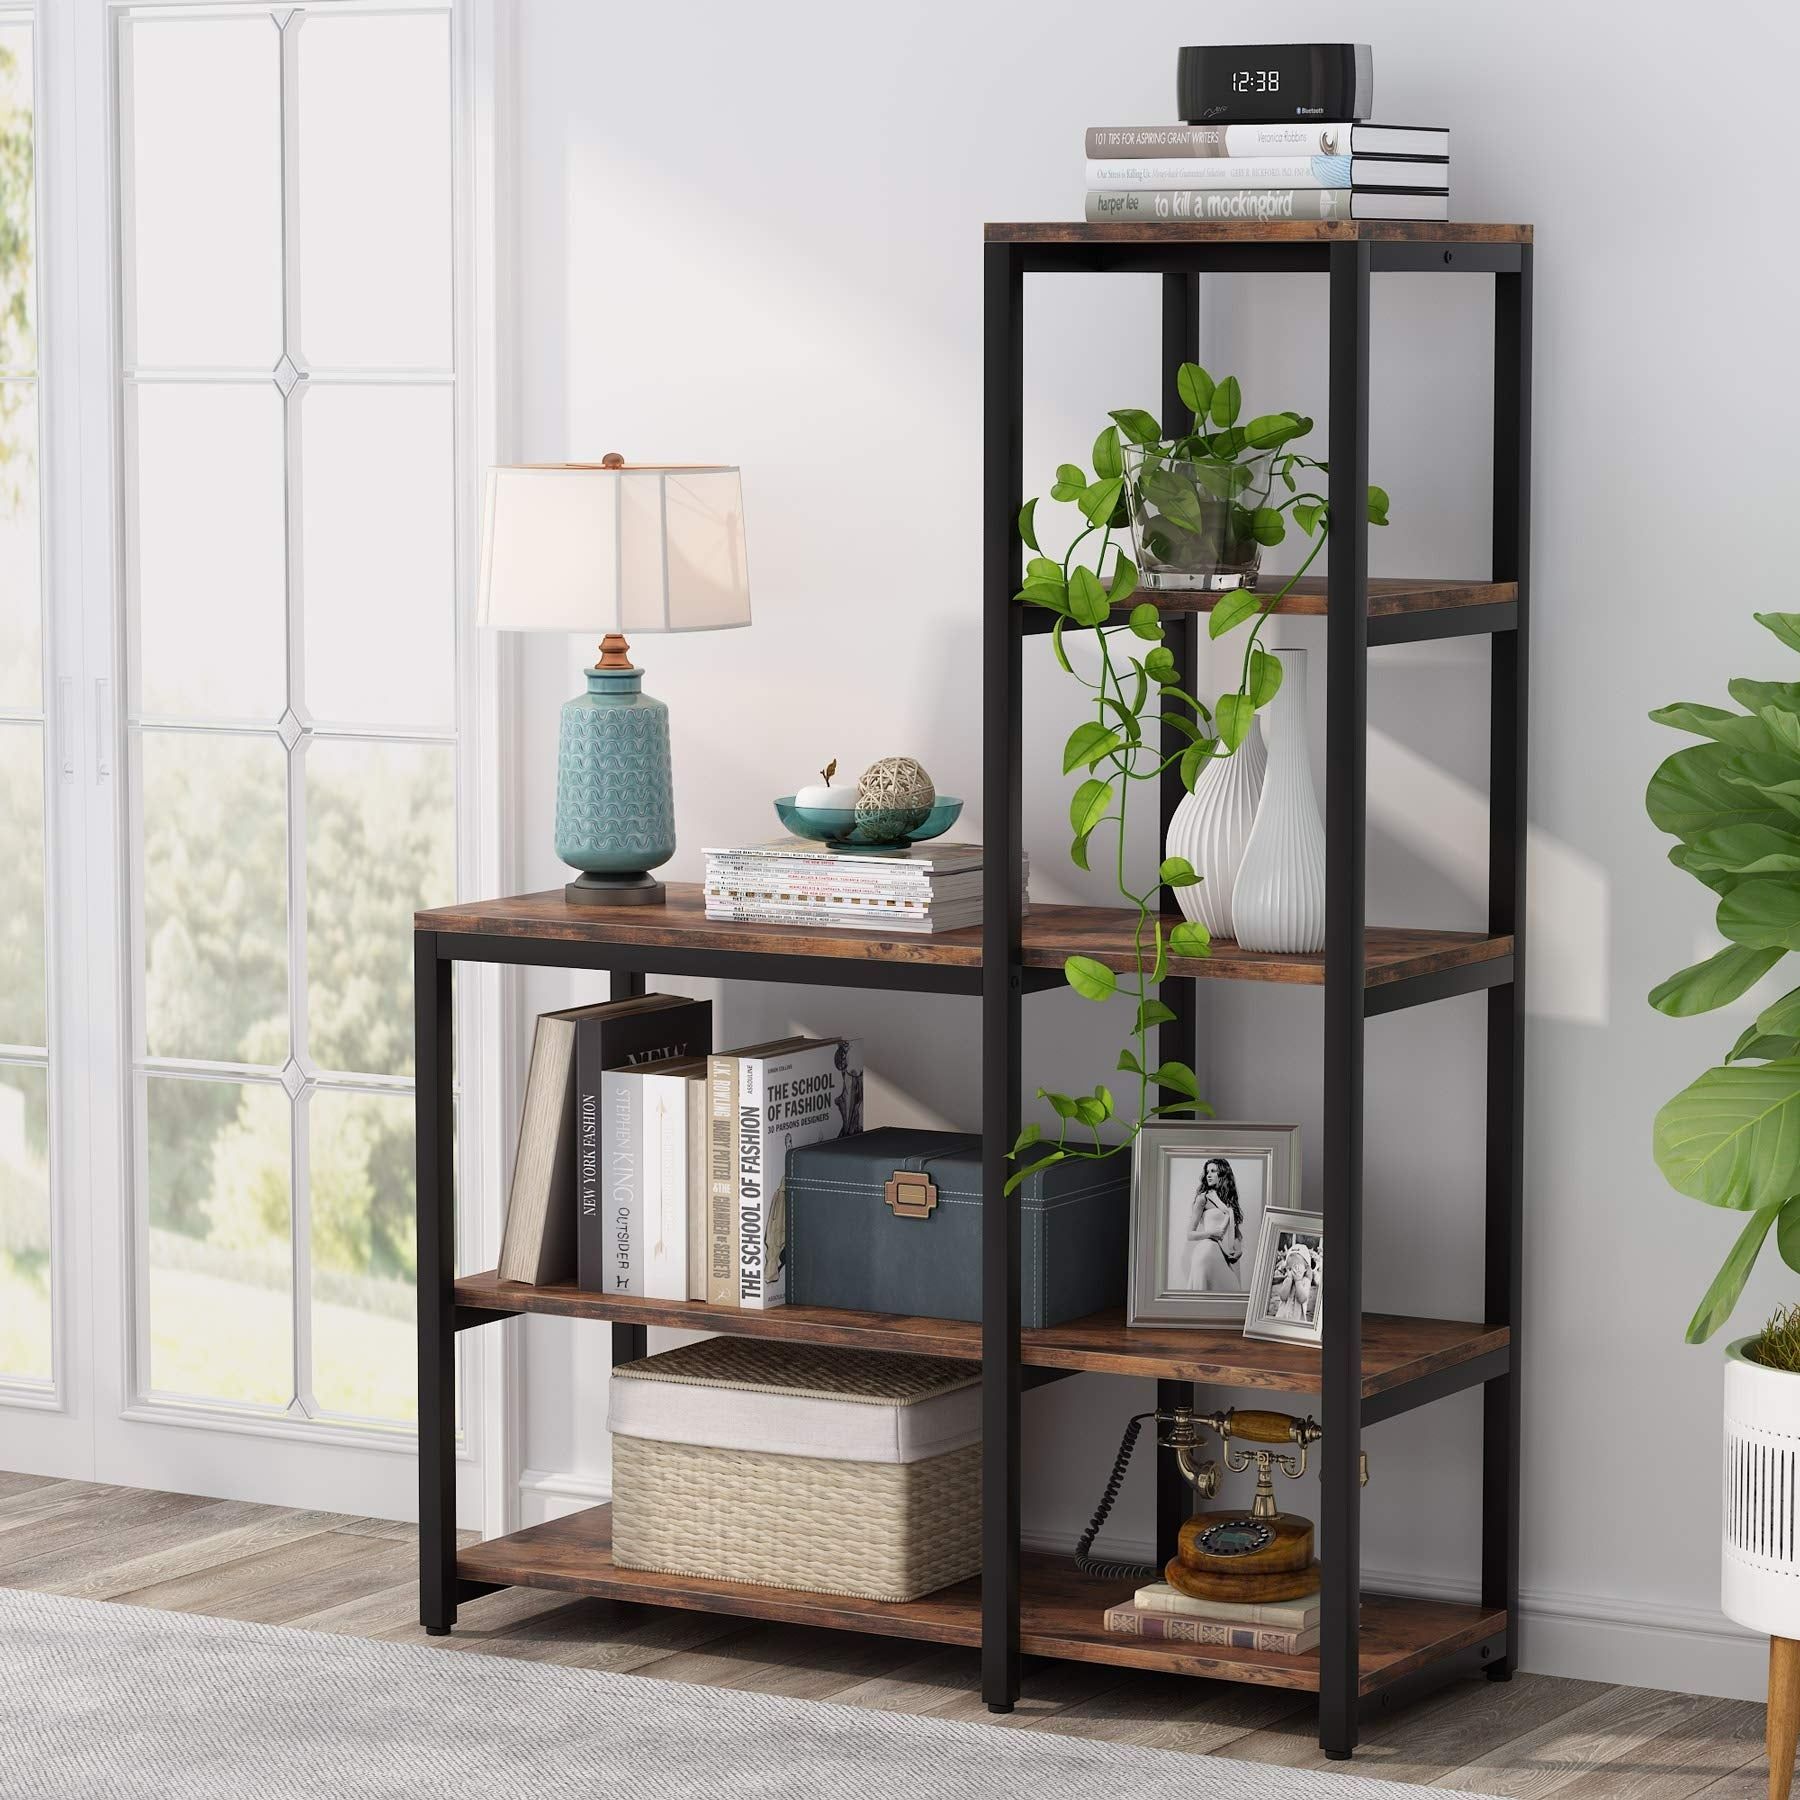 5 Tier Bookshelf, Ladder Conner Bookshelves Etagere Bookcase – Overstock –  33021260 Throughout Five Tier Bookcases (View 2 of 15)